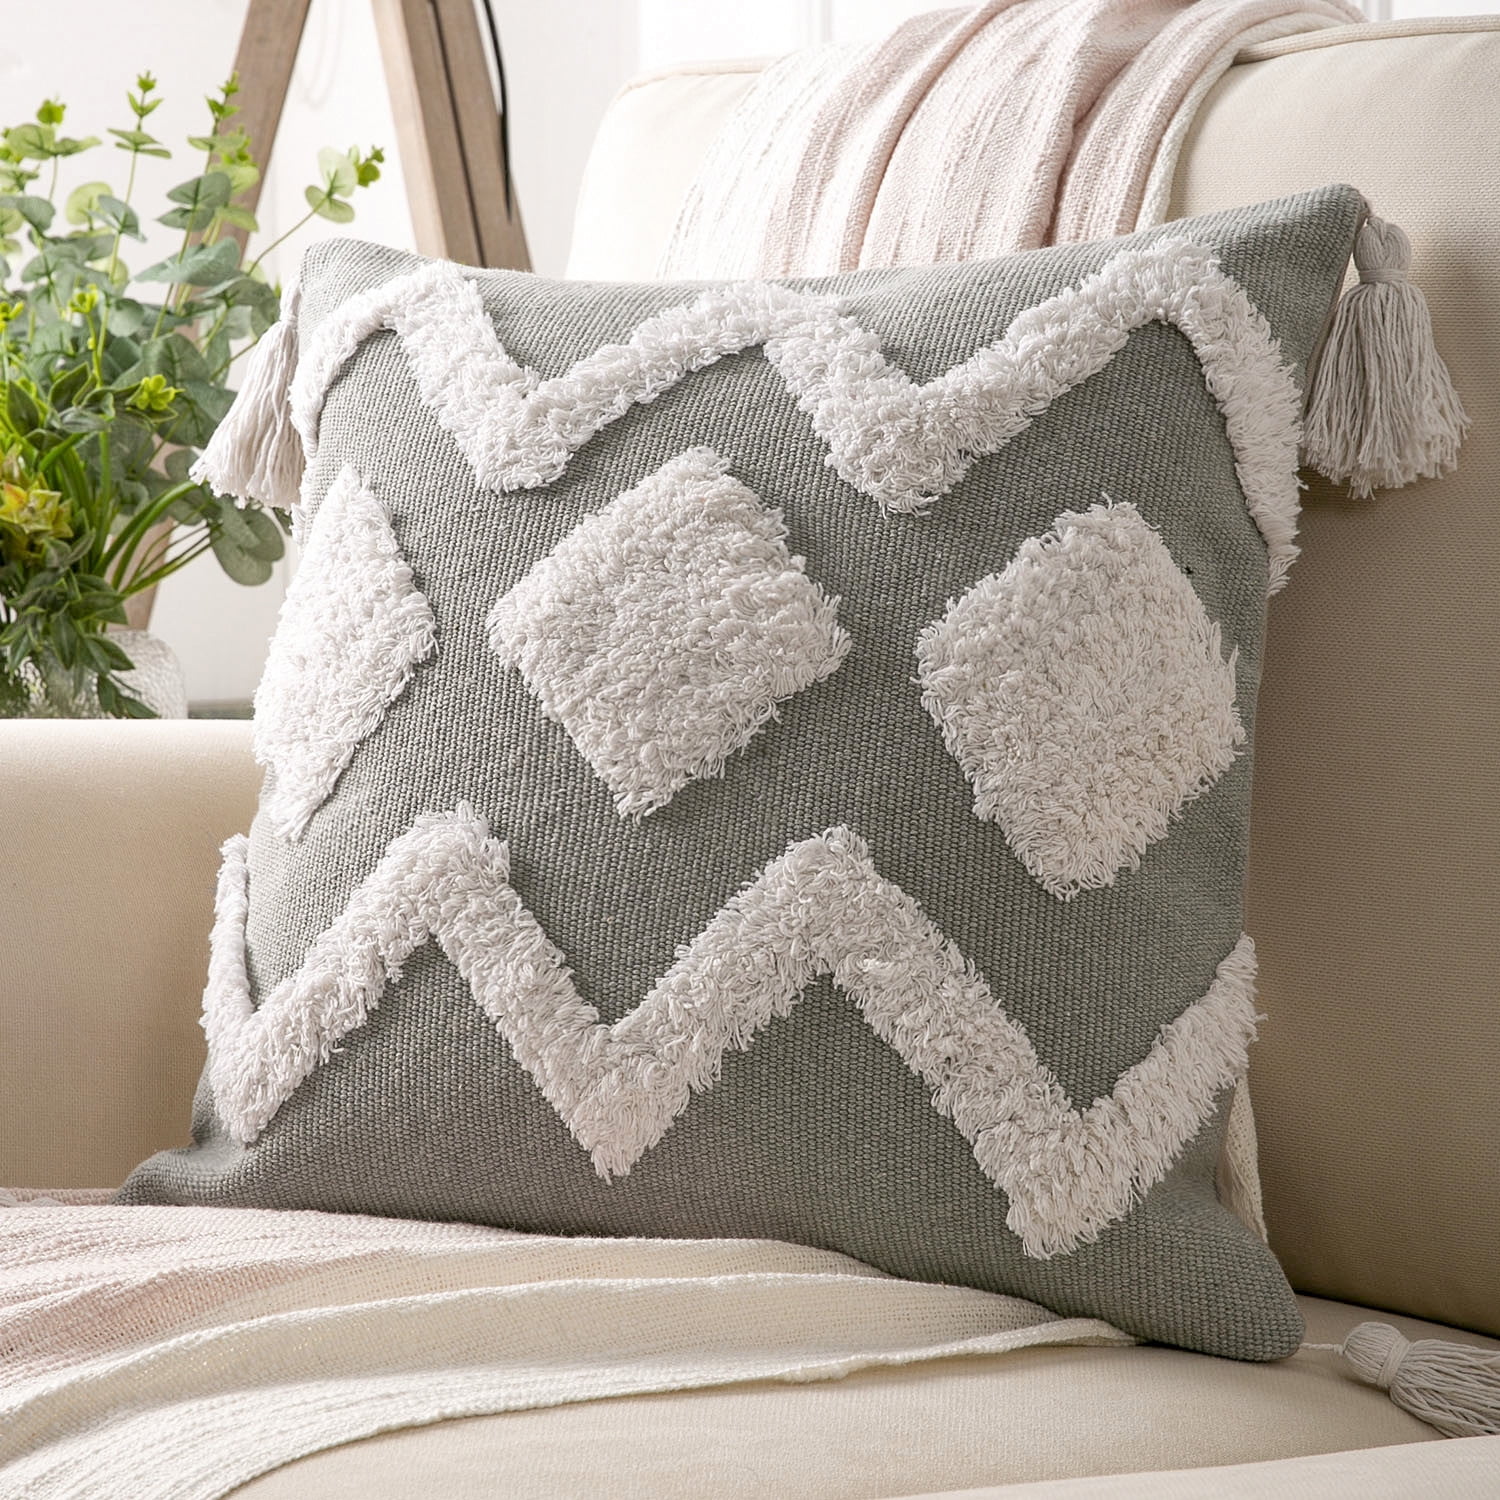  XSlive Tufted Woven Throw Pillow Cover Boho Geometric Printed  Decorative Cushion Cover with Tassel Cotton Linen Square Pillowcase for  Sofa Couch Home Decor (Type C,18x18) : Home & Kitchen